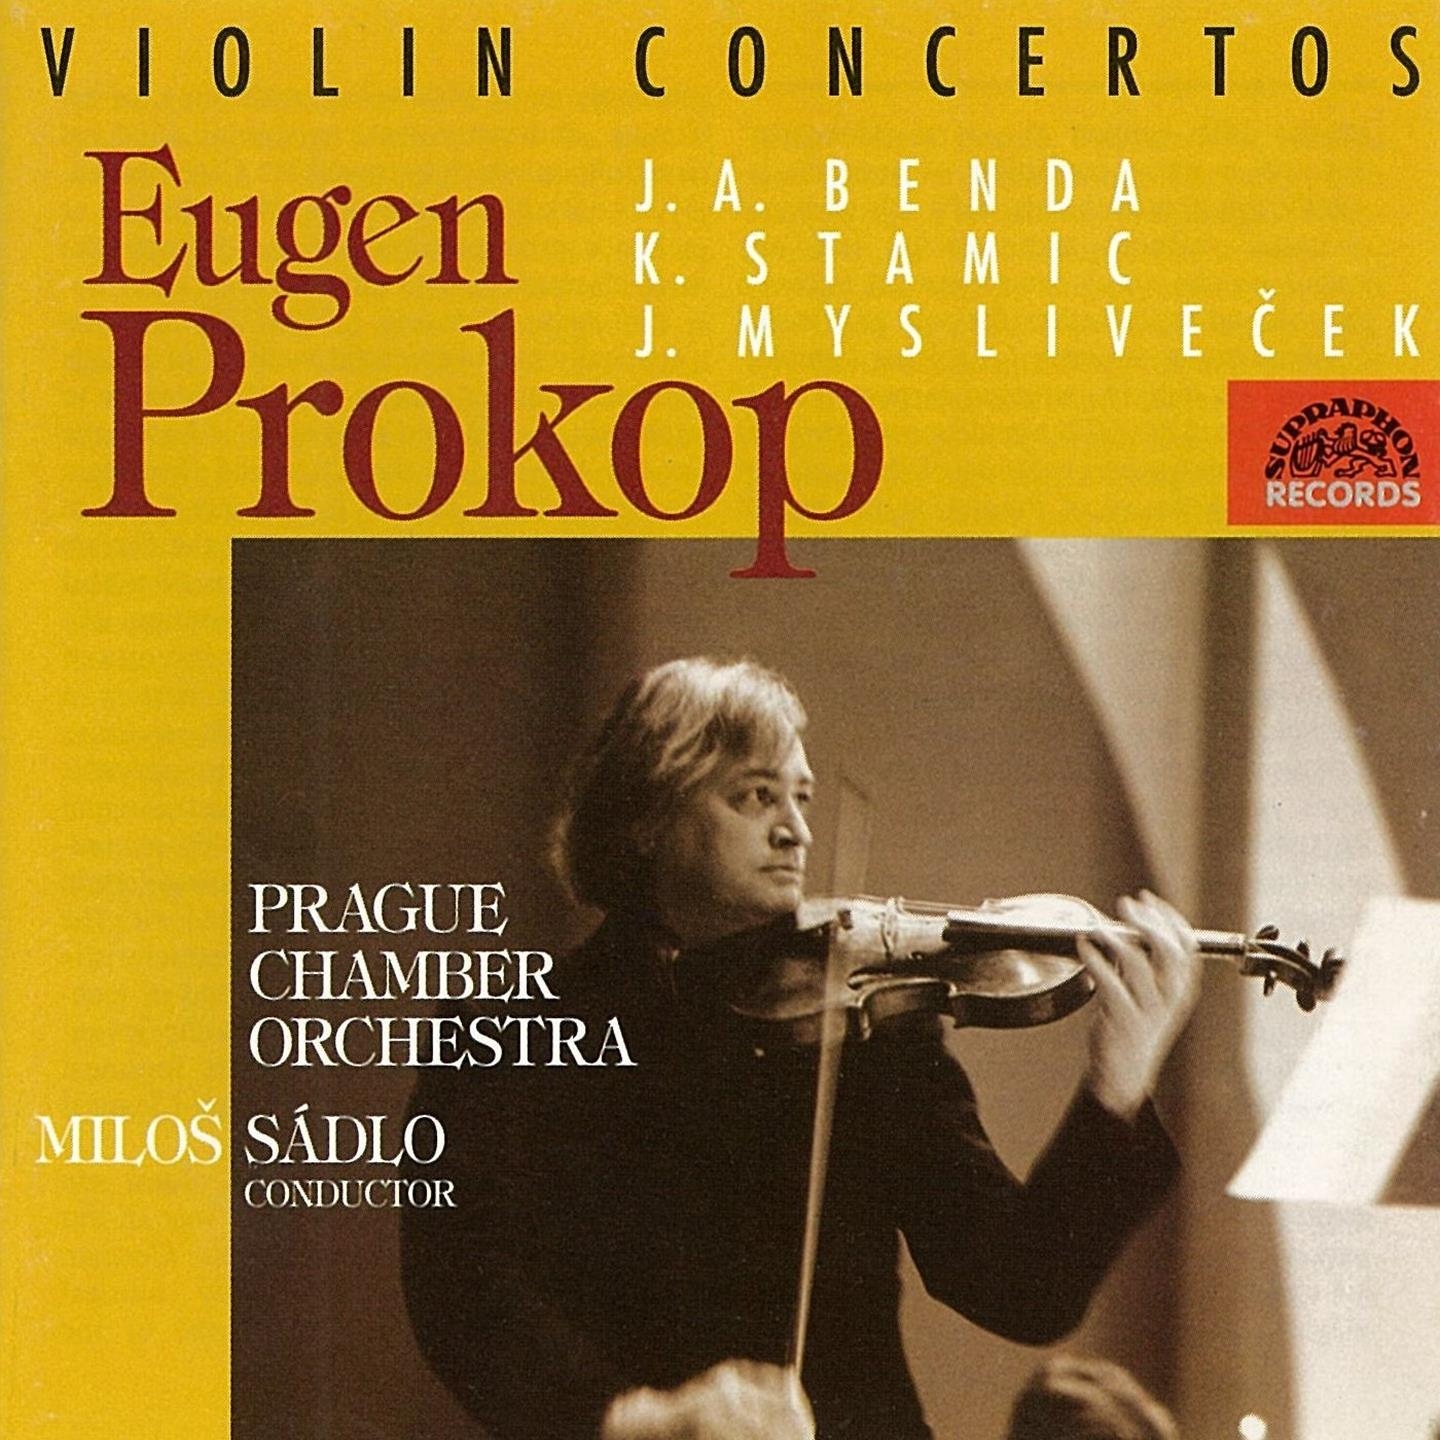 Concerto for Violin and Orchestra in D-Sharp Major, .: III. Allegro